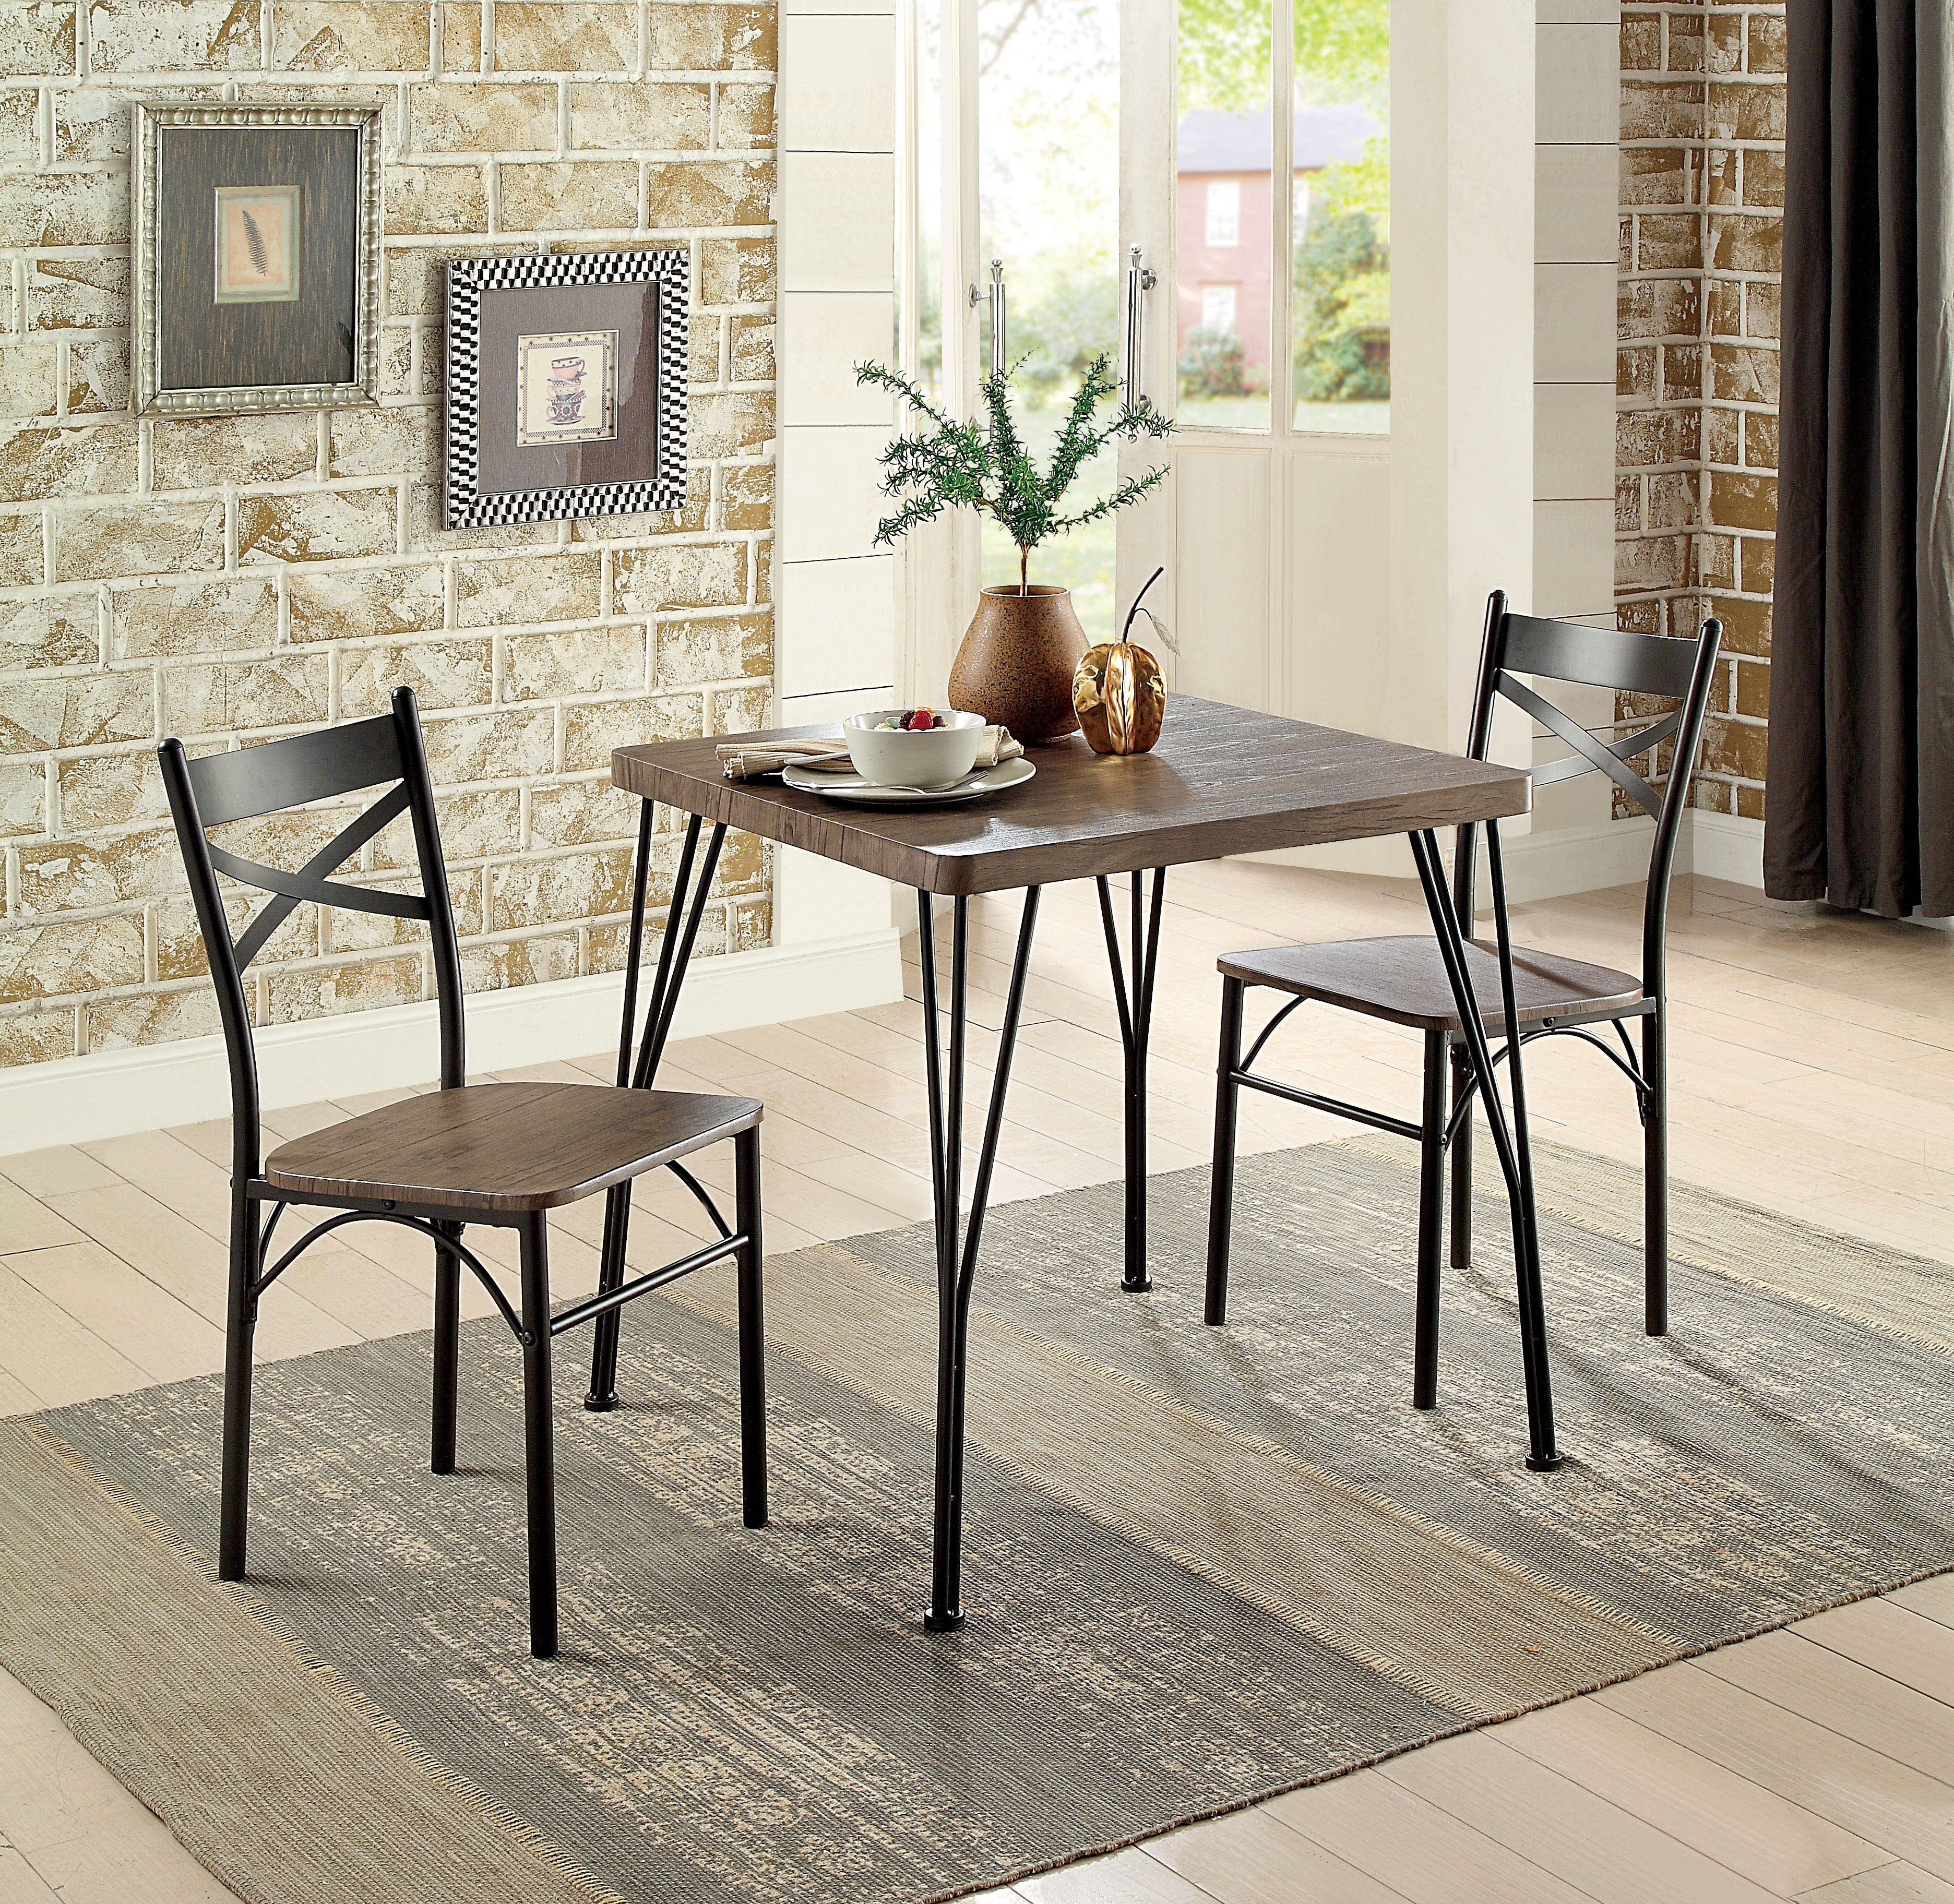 Preferred Mulvey 5 Piece Dining Sets With Guertin 3 Piece Dining Set (View 17 of 20)